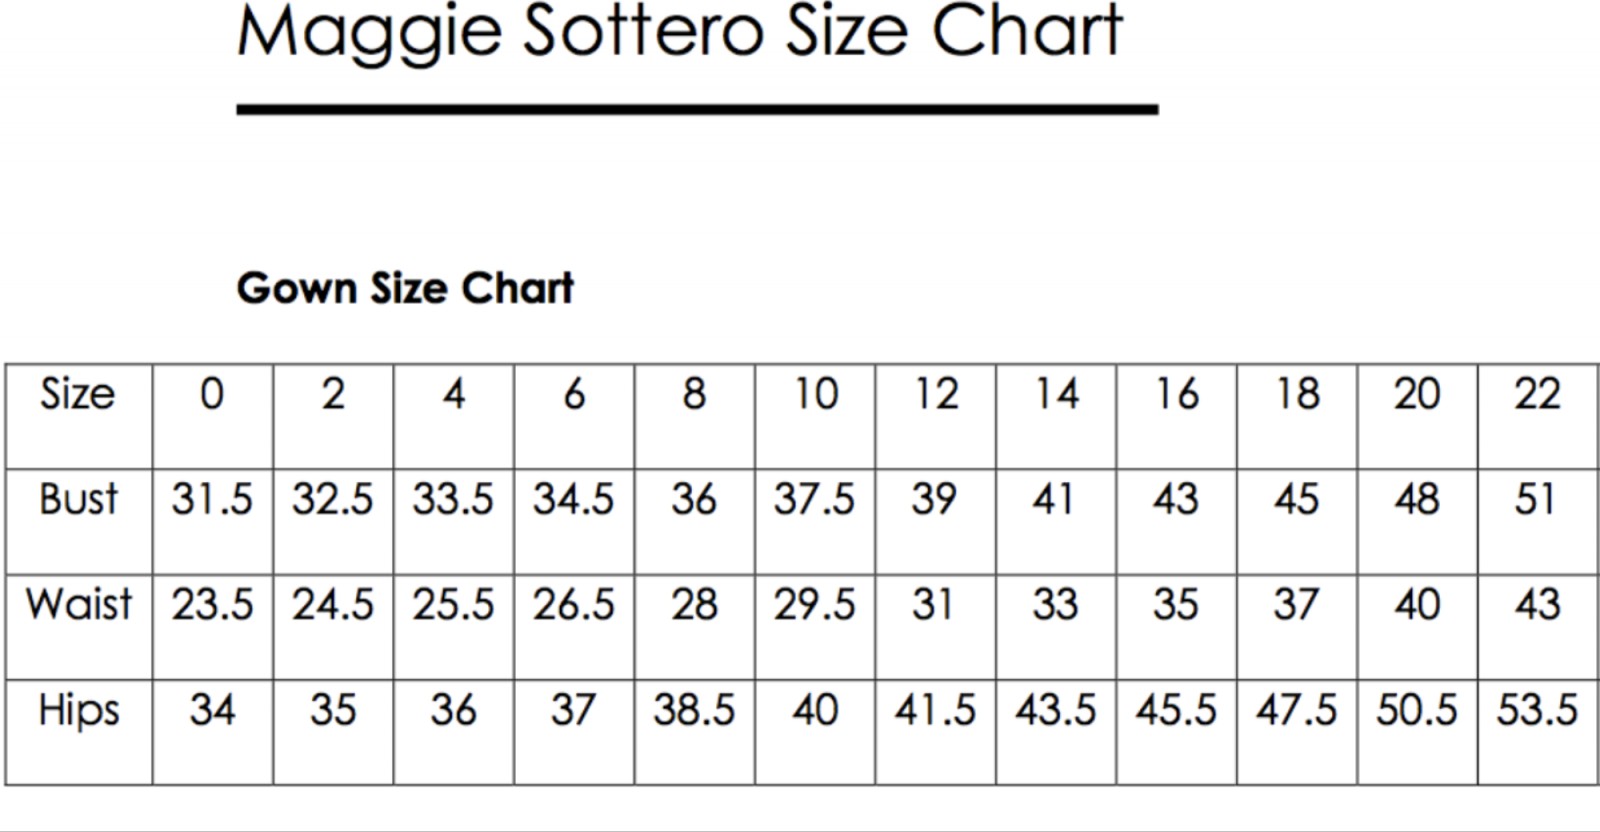 Maggie Sottero Size Chart 2016